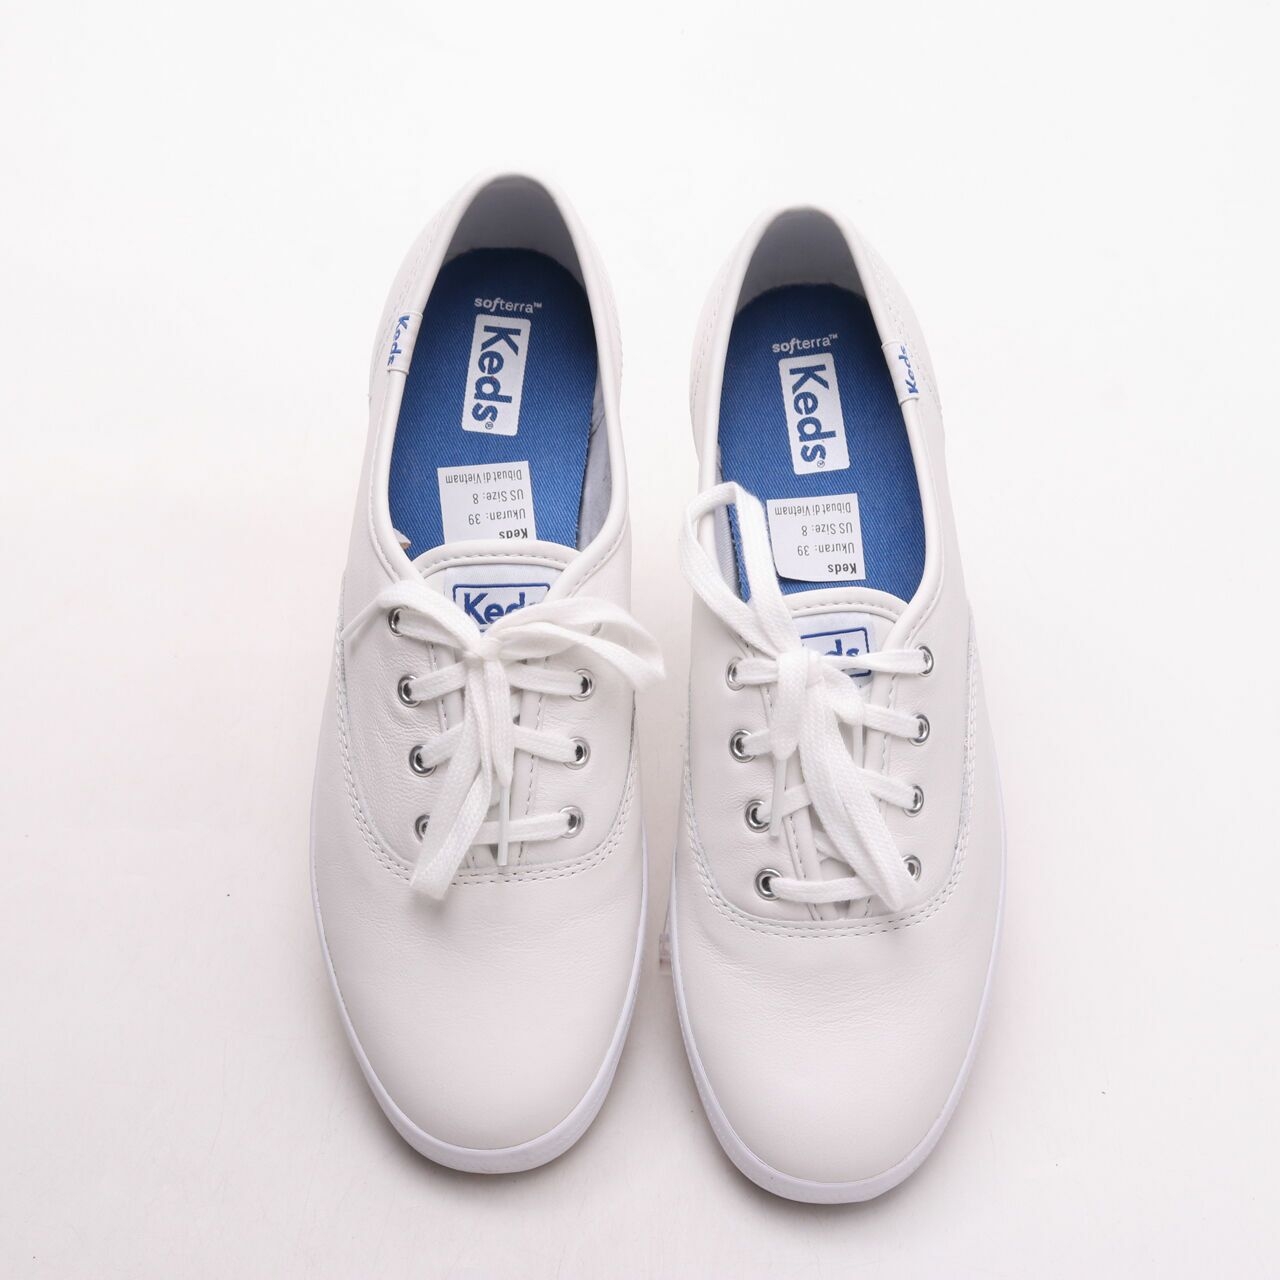 Keds Champions White Leather Sneakers